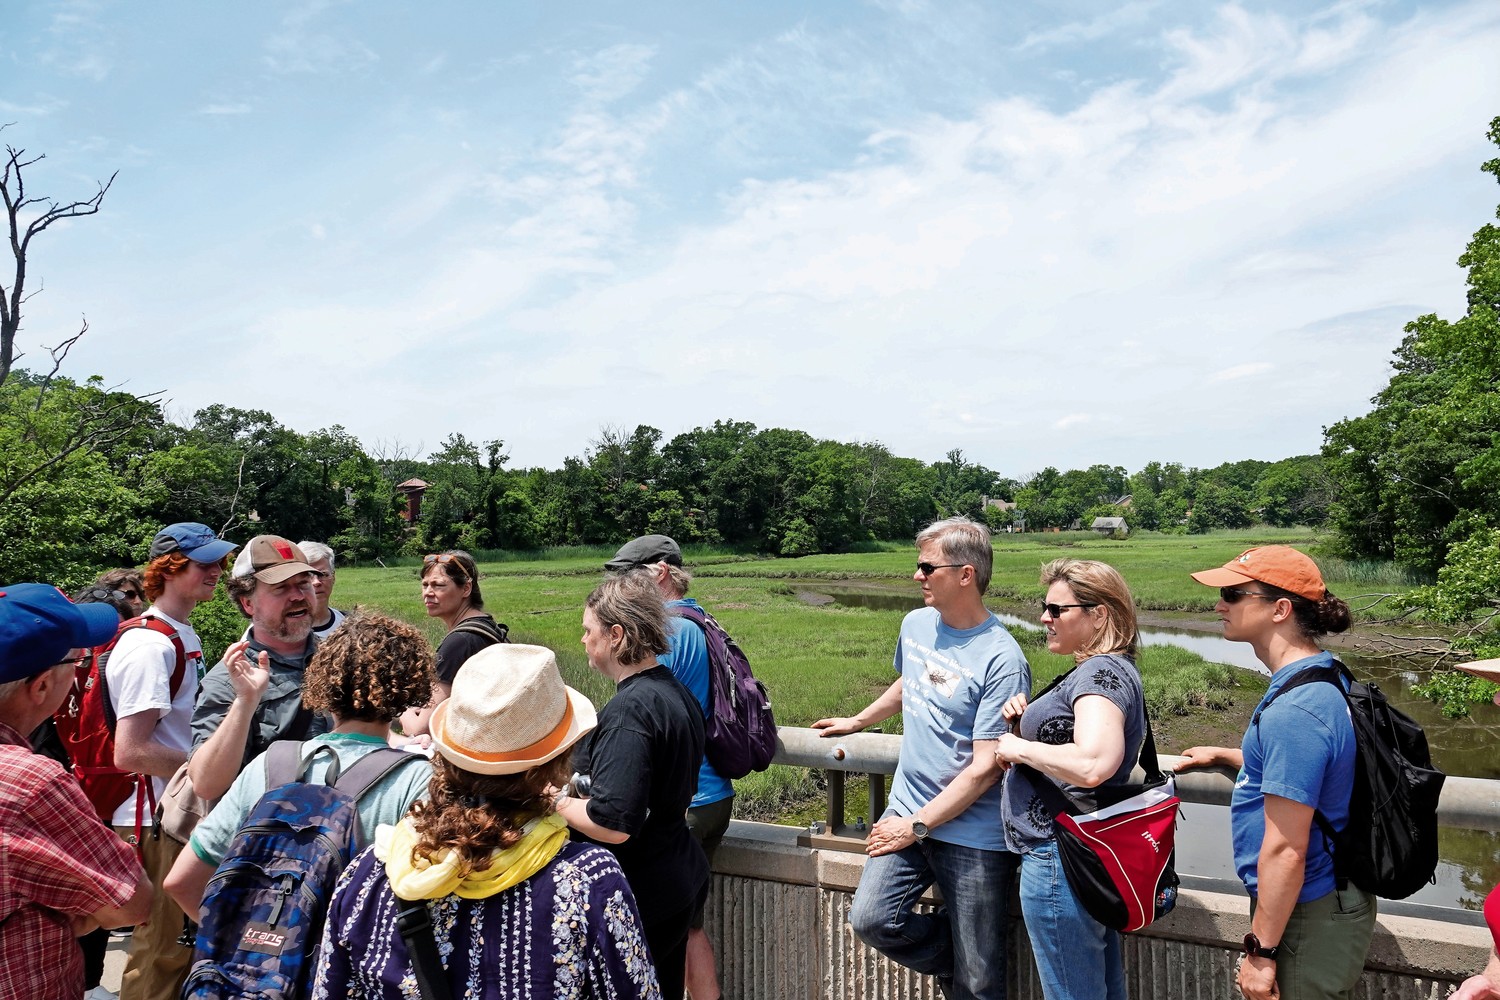 People take part in a tour of Lemon Creek on Staten Island led by NYC H2O, an organization that seeks to educate people about New York City's water system. NYC H2O will host a new walking tour in and around Marble Hill that will show the history of the Harlem Ship Canal on Aug. 4.